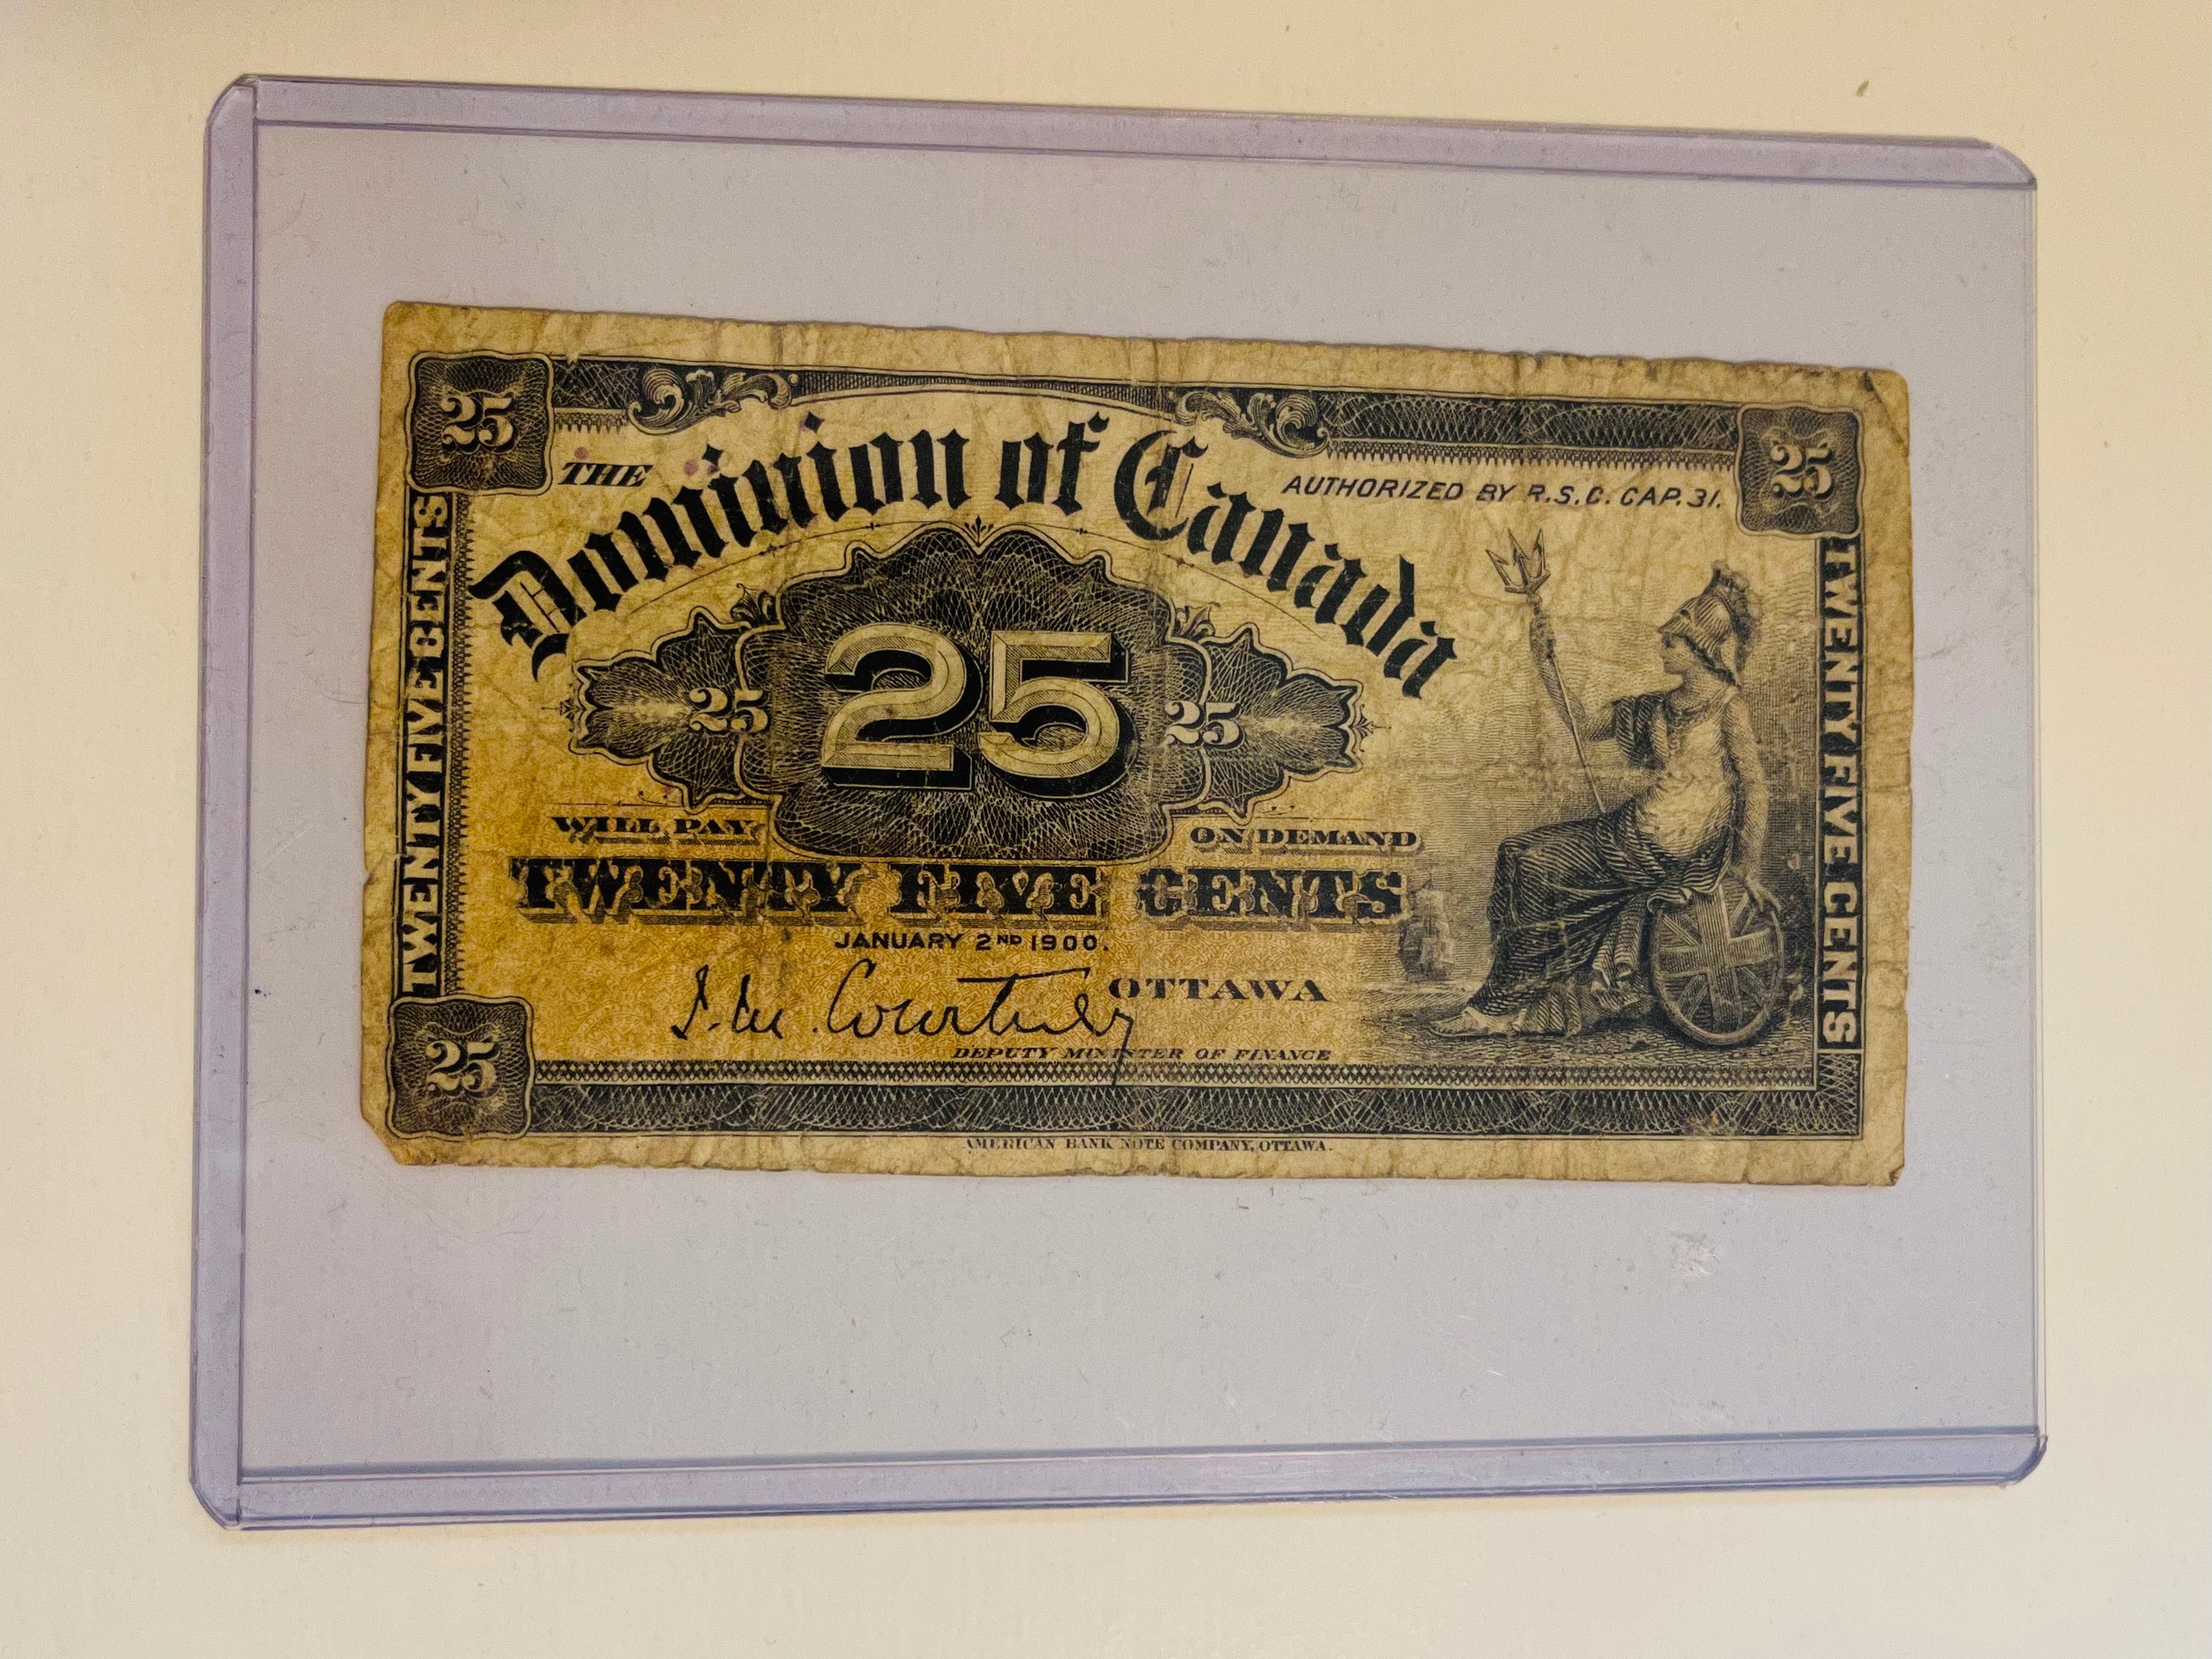 Dominion of Canada 25 cent vintage Bill 1900s series